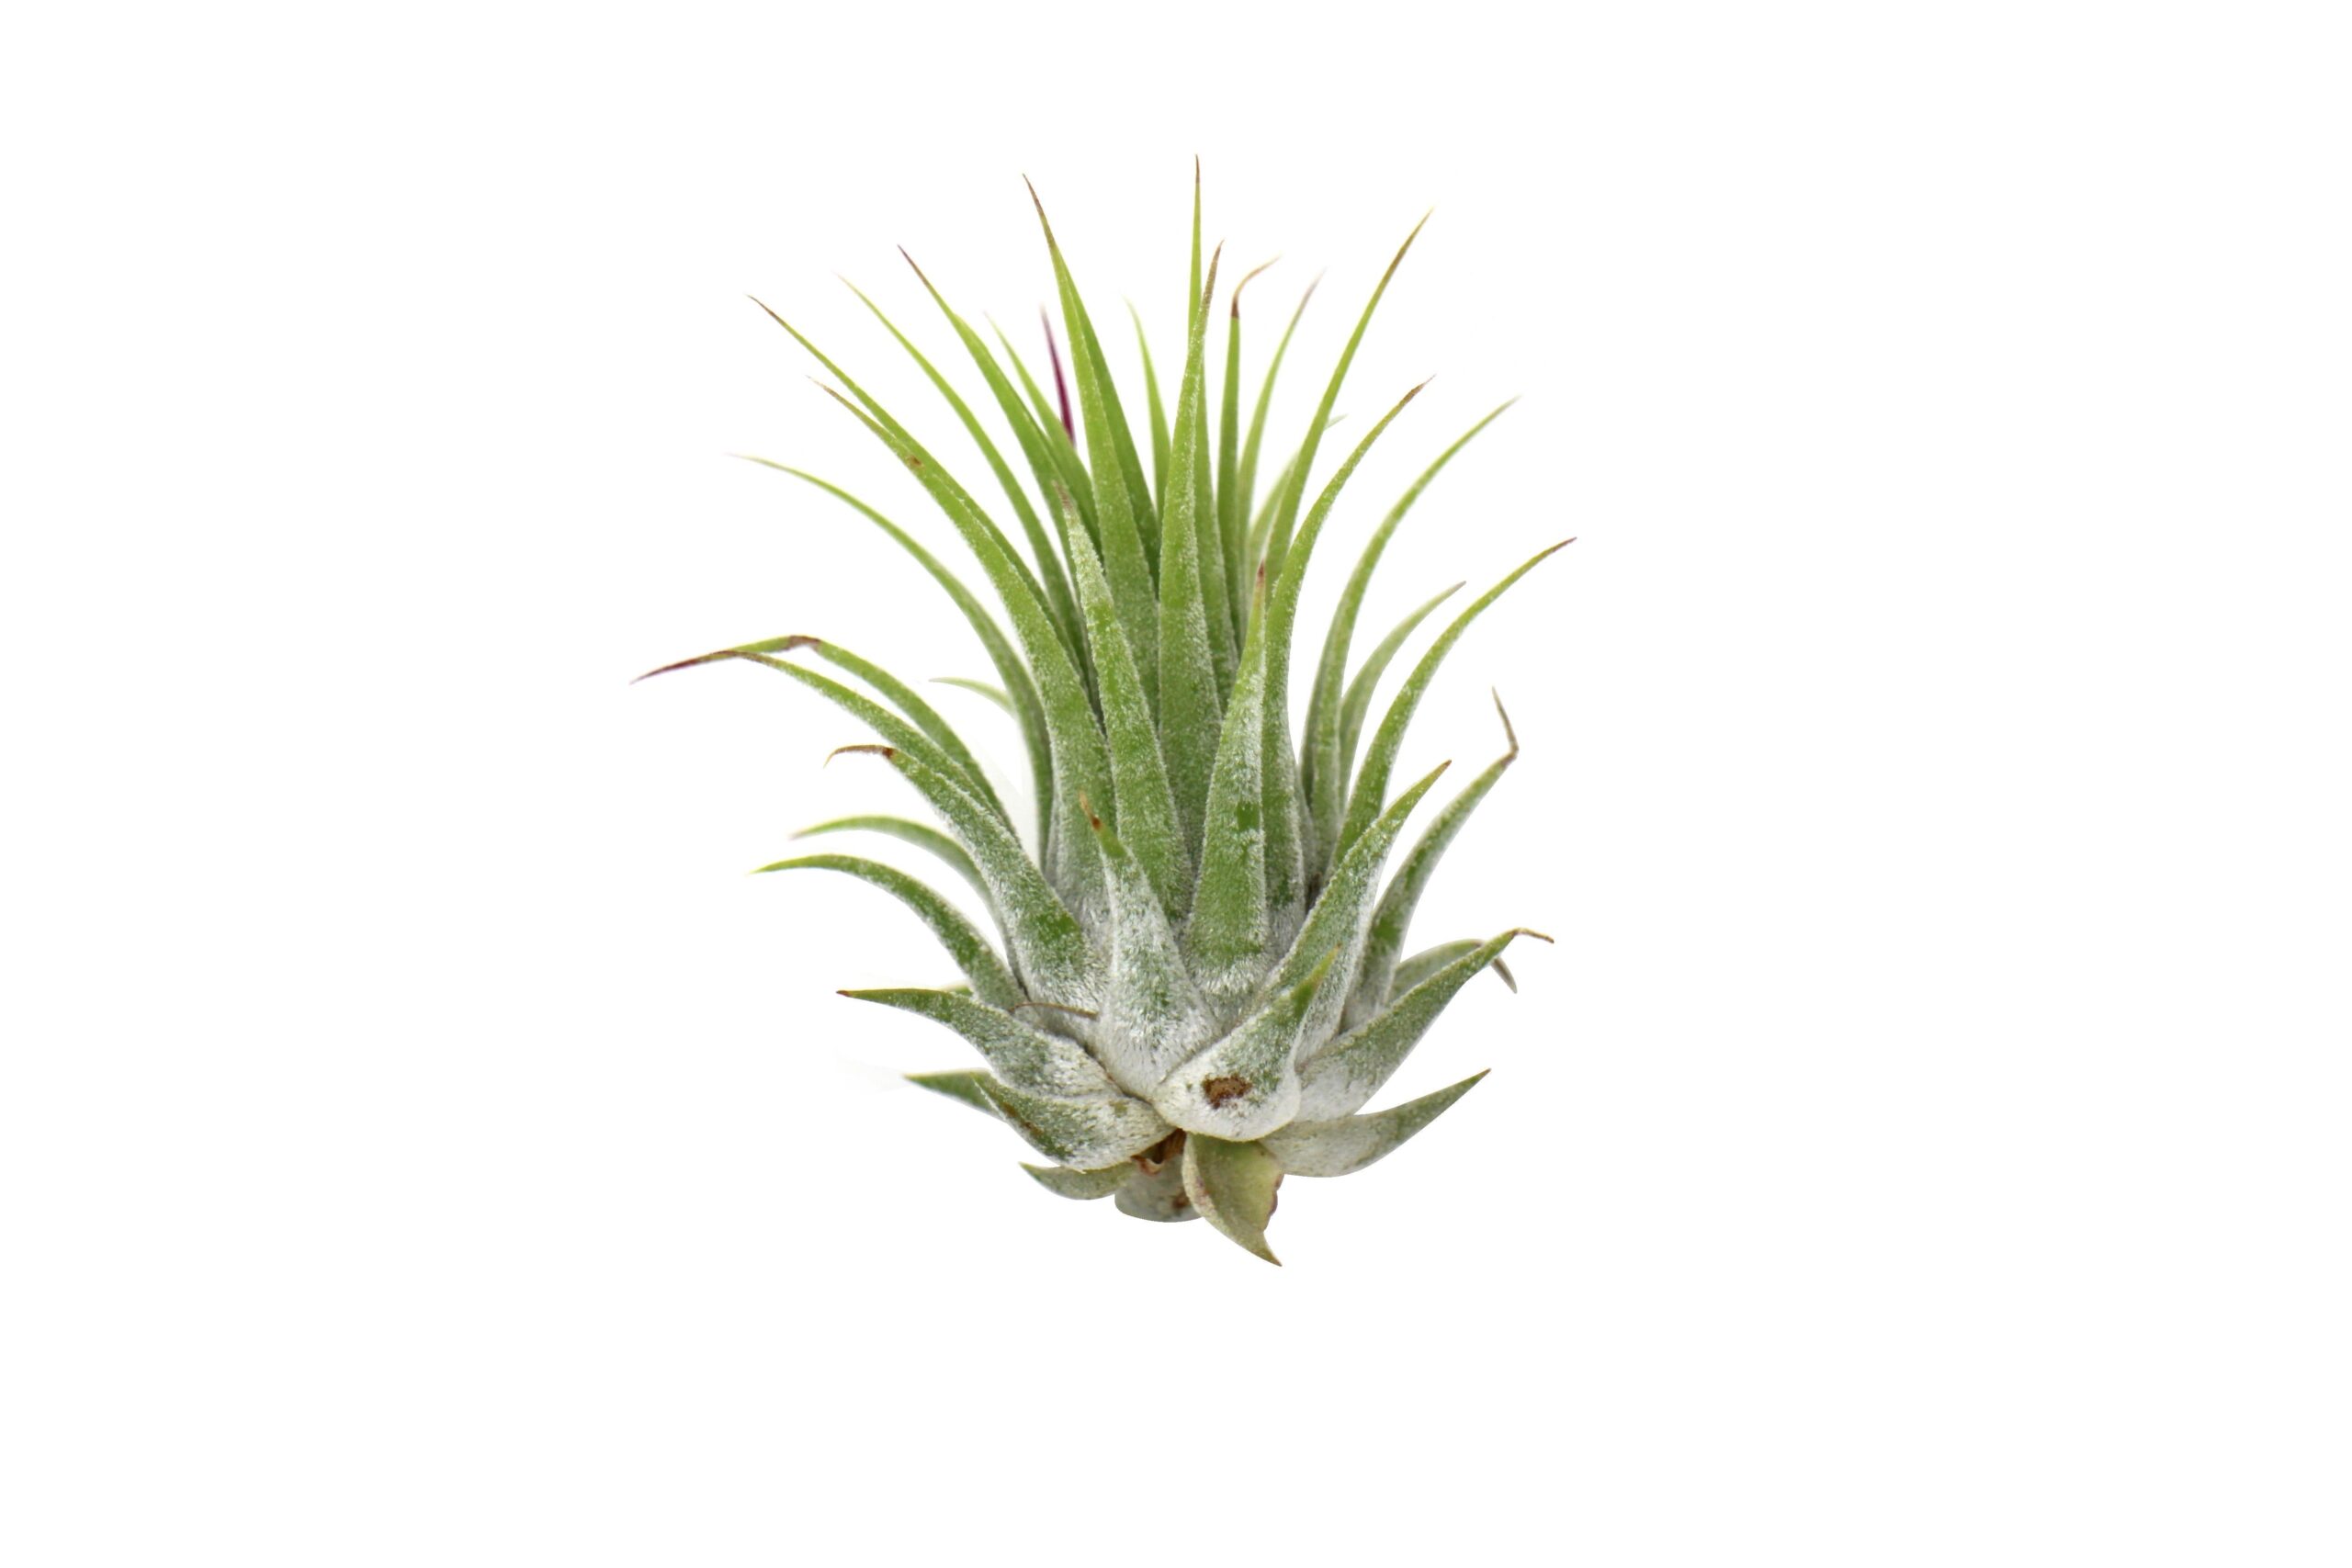 A small air plant on a white background found at one of the best garden nurseries near me.